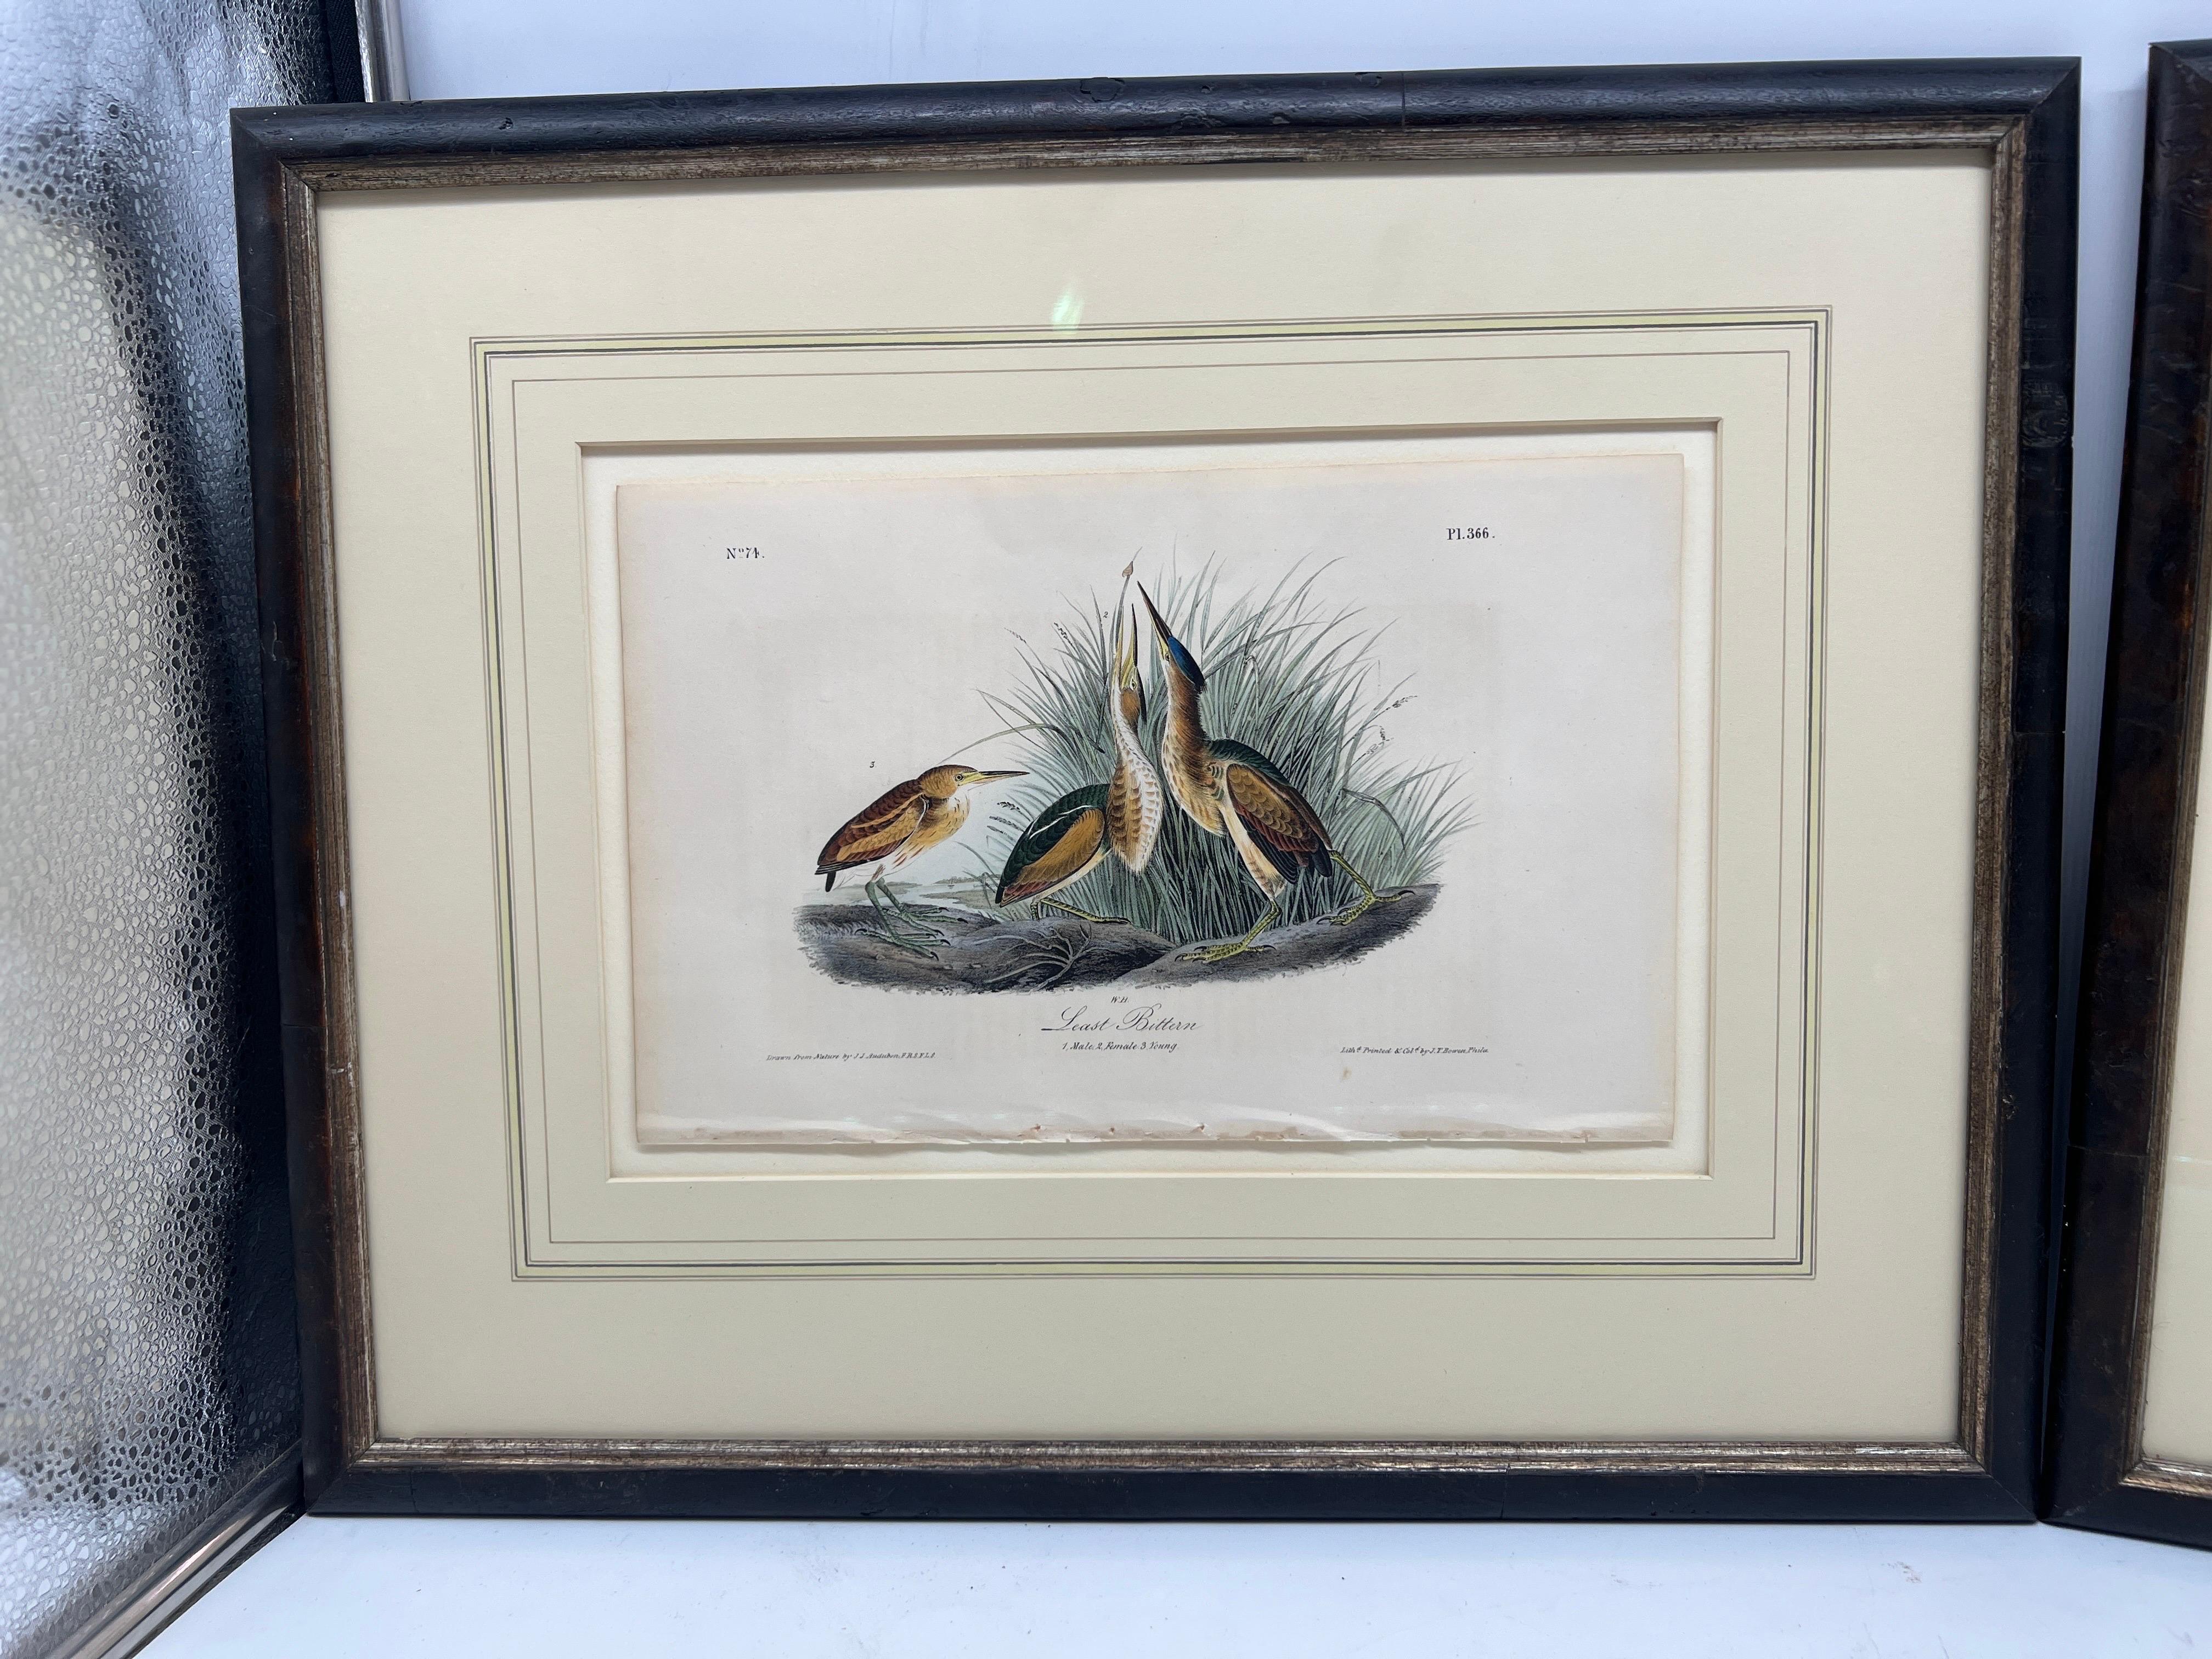 American, 19th century. 

A pair of well framed and mounted John James Audubon ornithological engravings of 